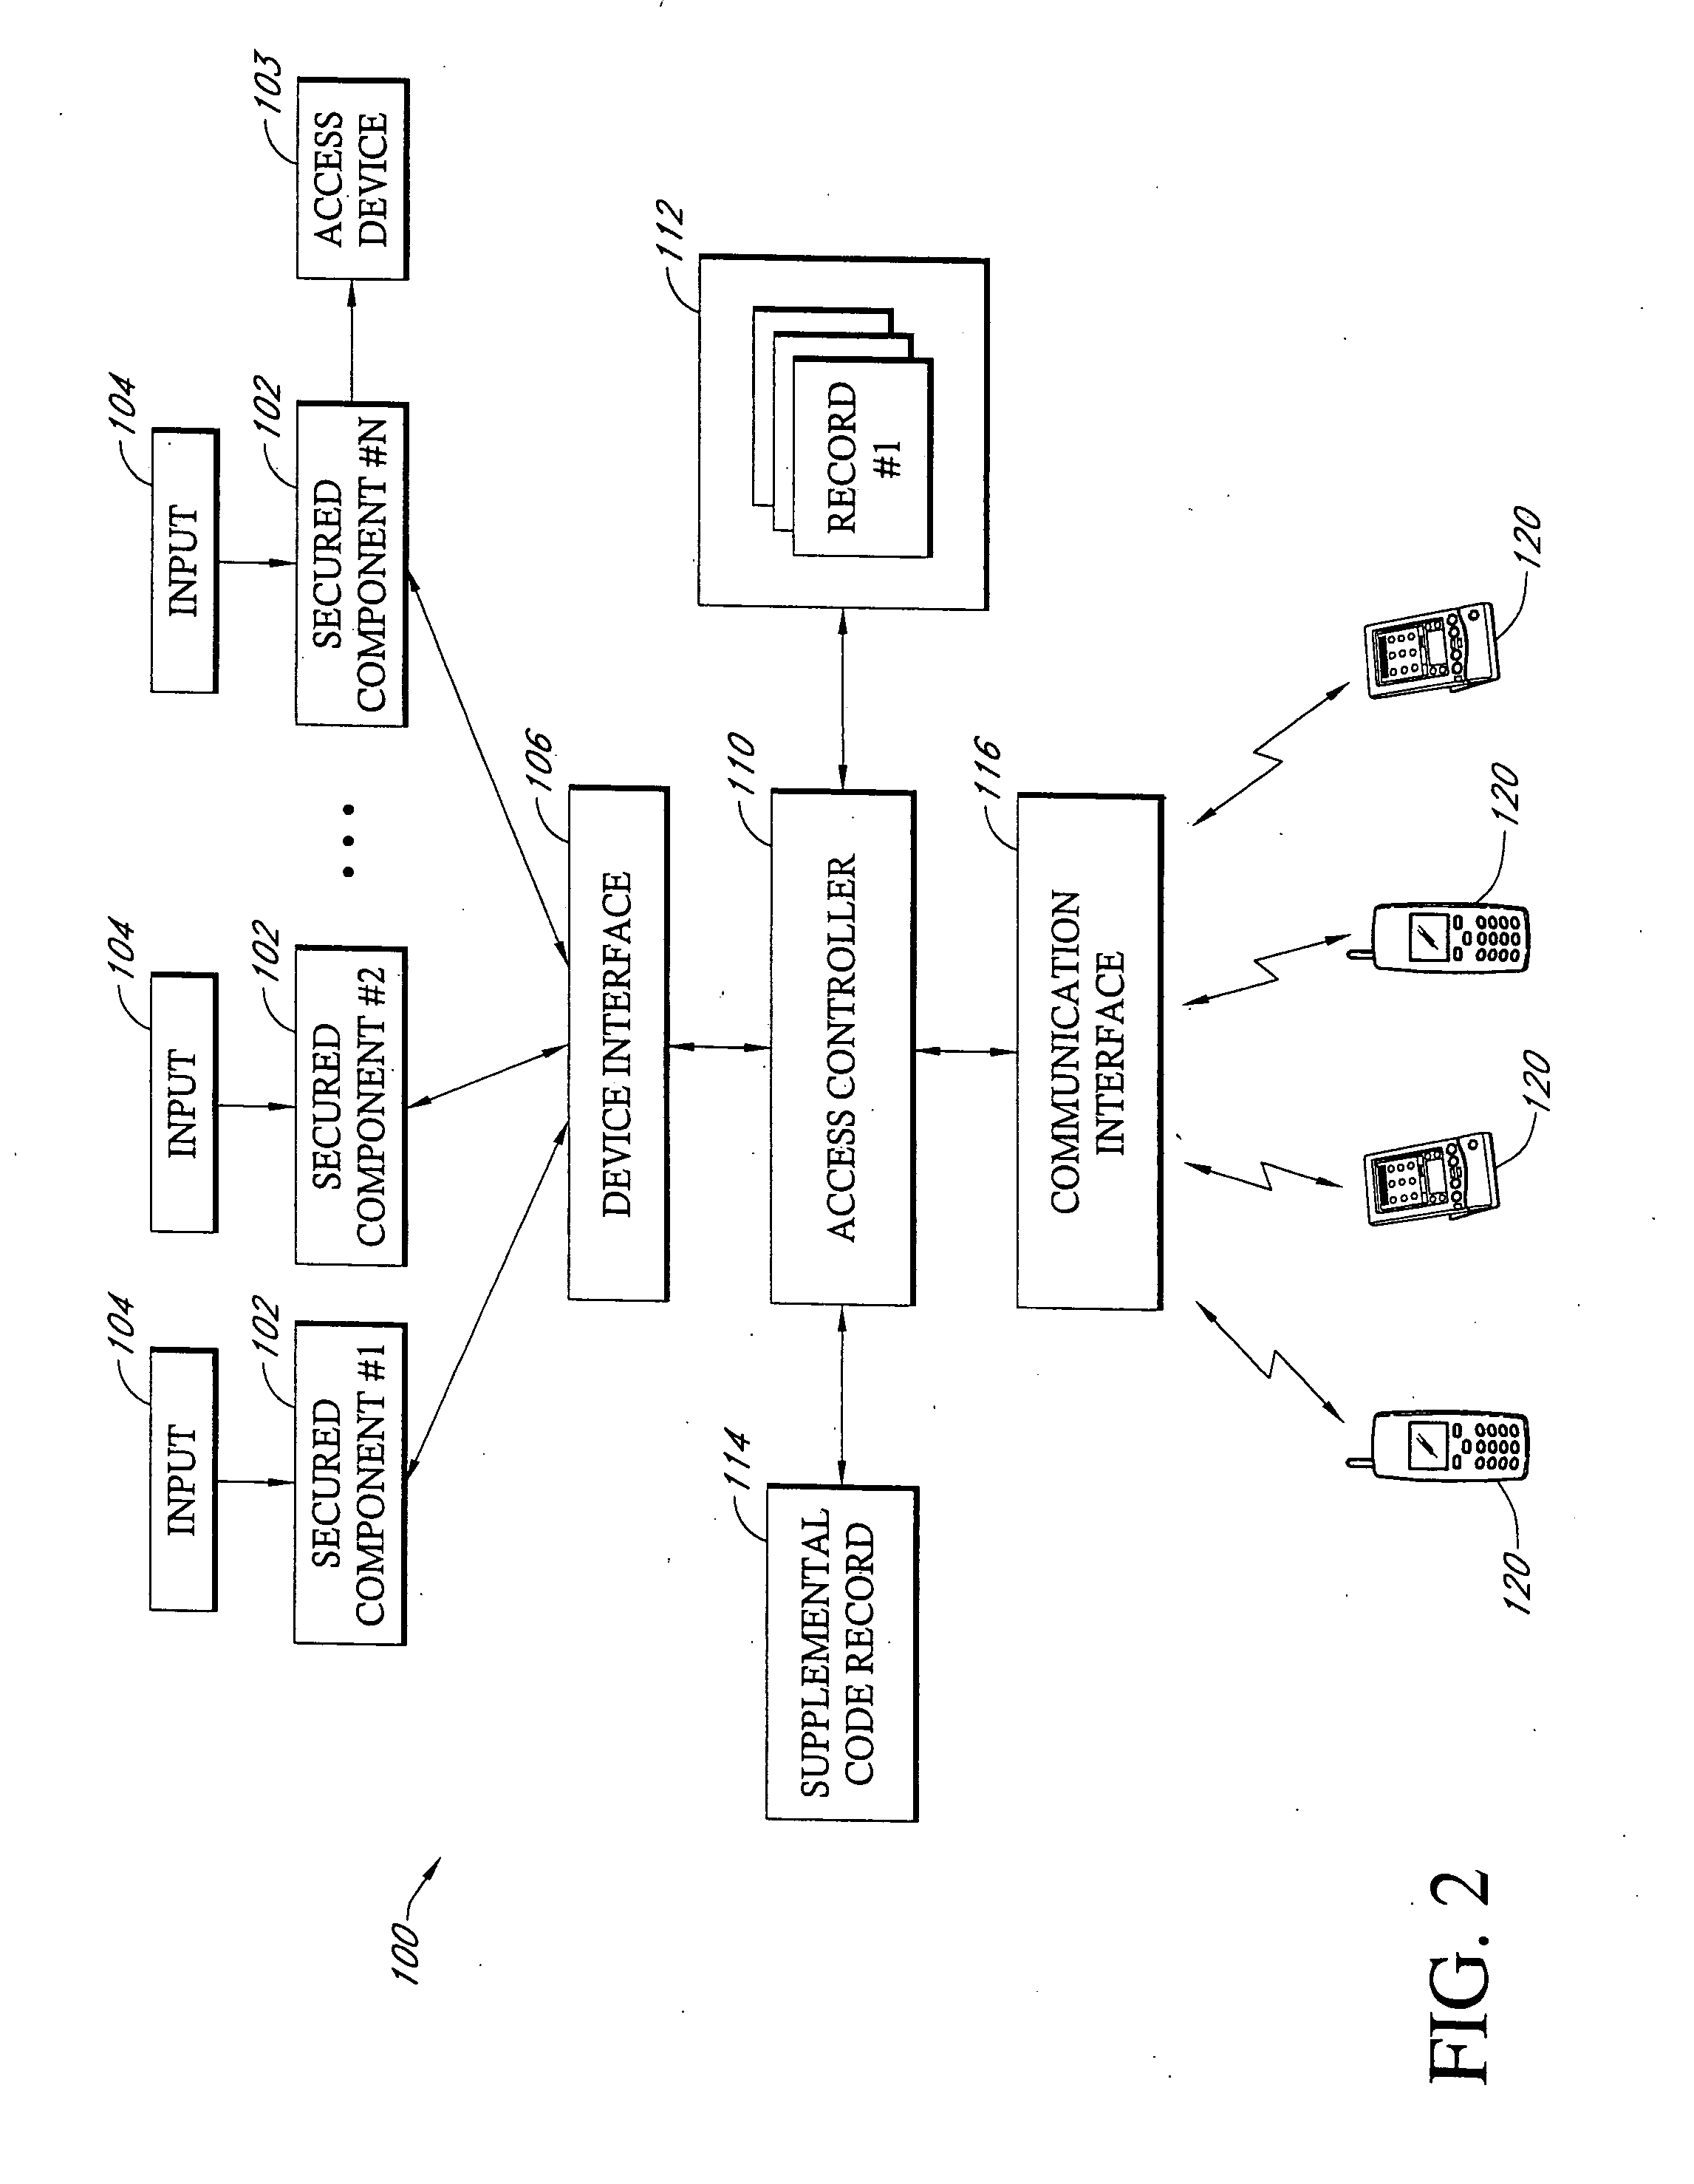 Method and system for alternative access using mobile electronic devices